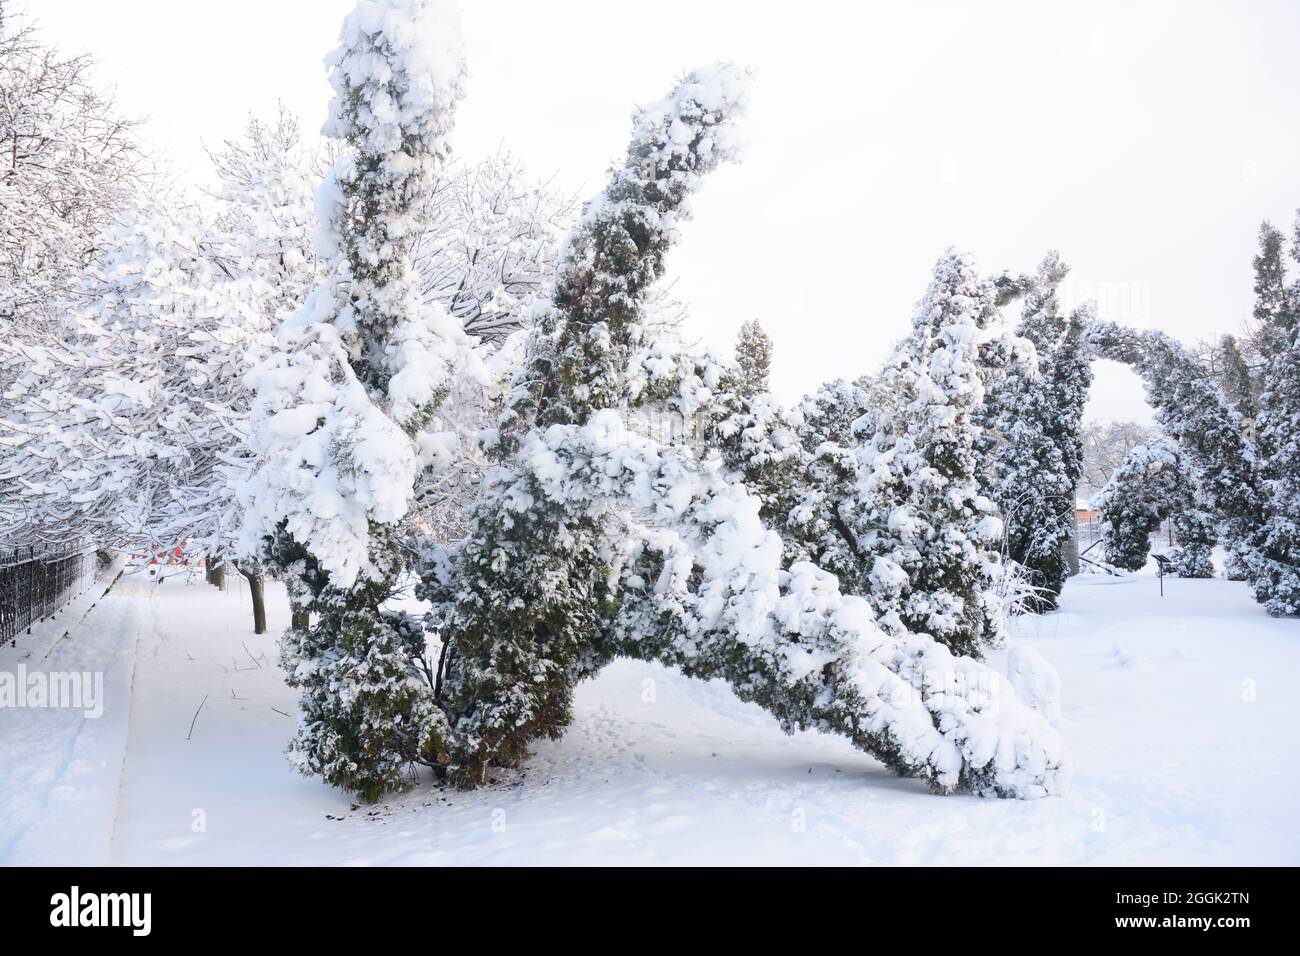 After the Snow Storm: Coping with Snow- and Ice-Damaged Trees. Snow damaged Thuja occidentalis trees. Stock Photo